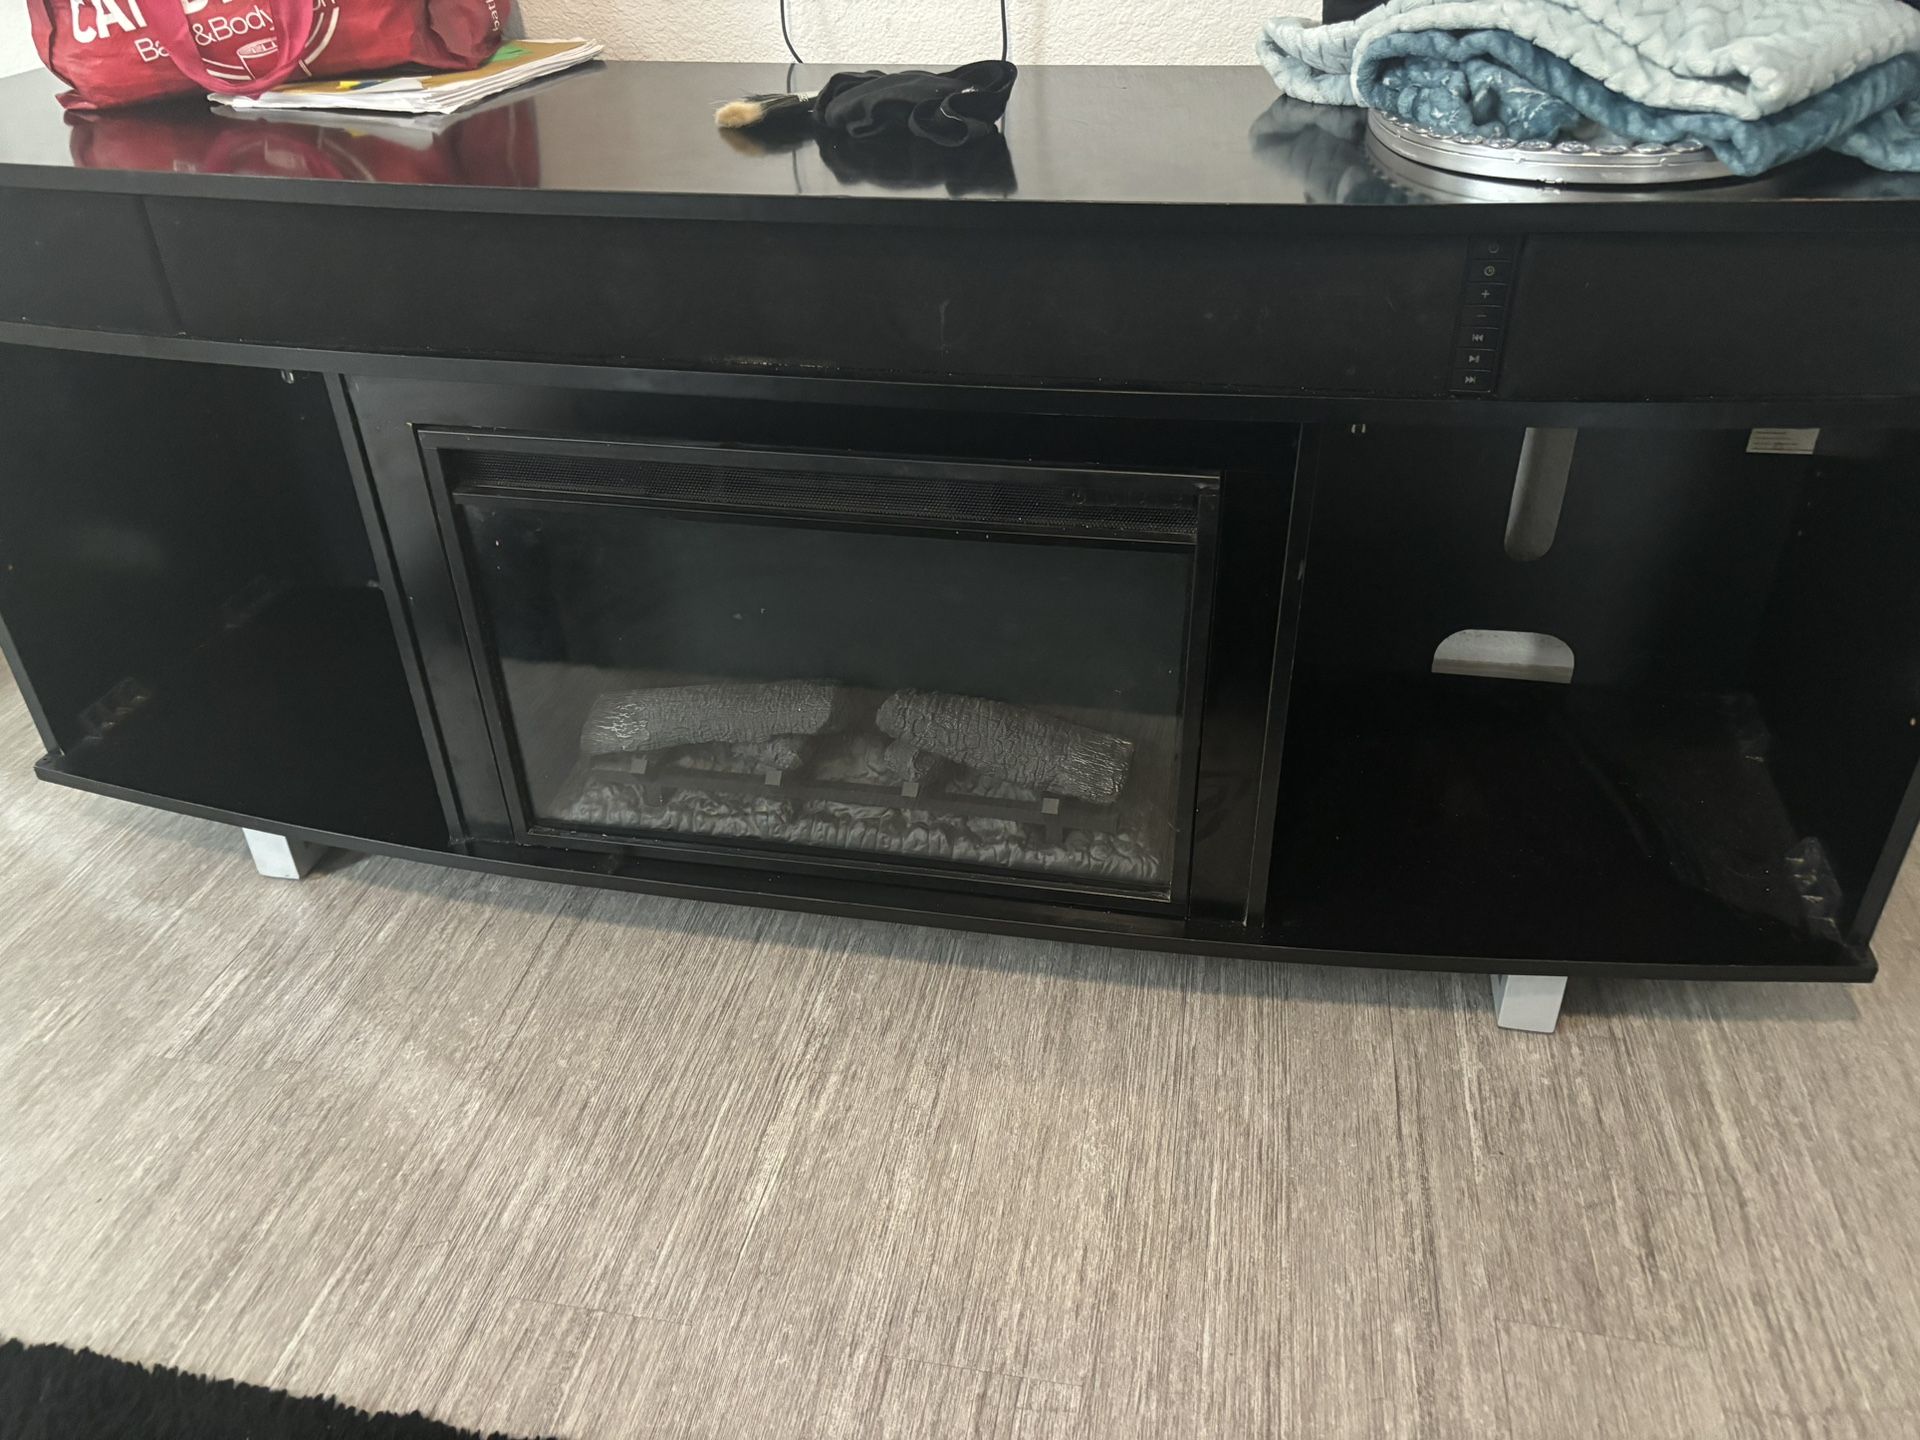 FREE Fireplace And Sound Bar Tv Stand FREE